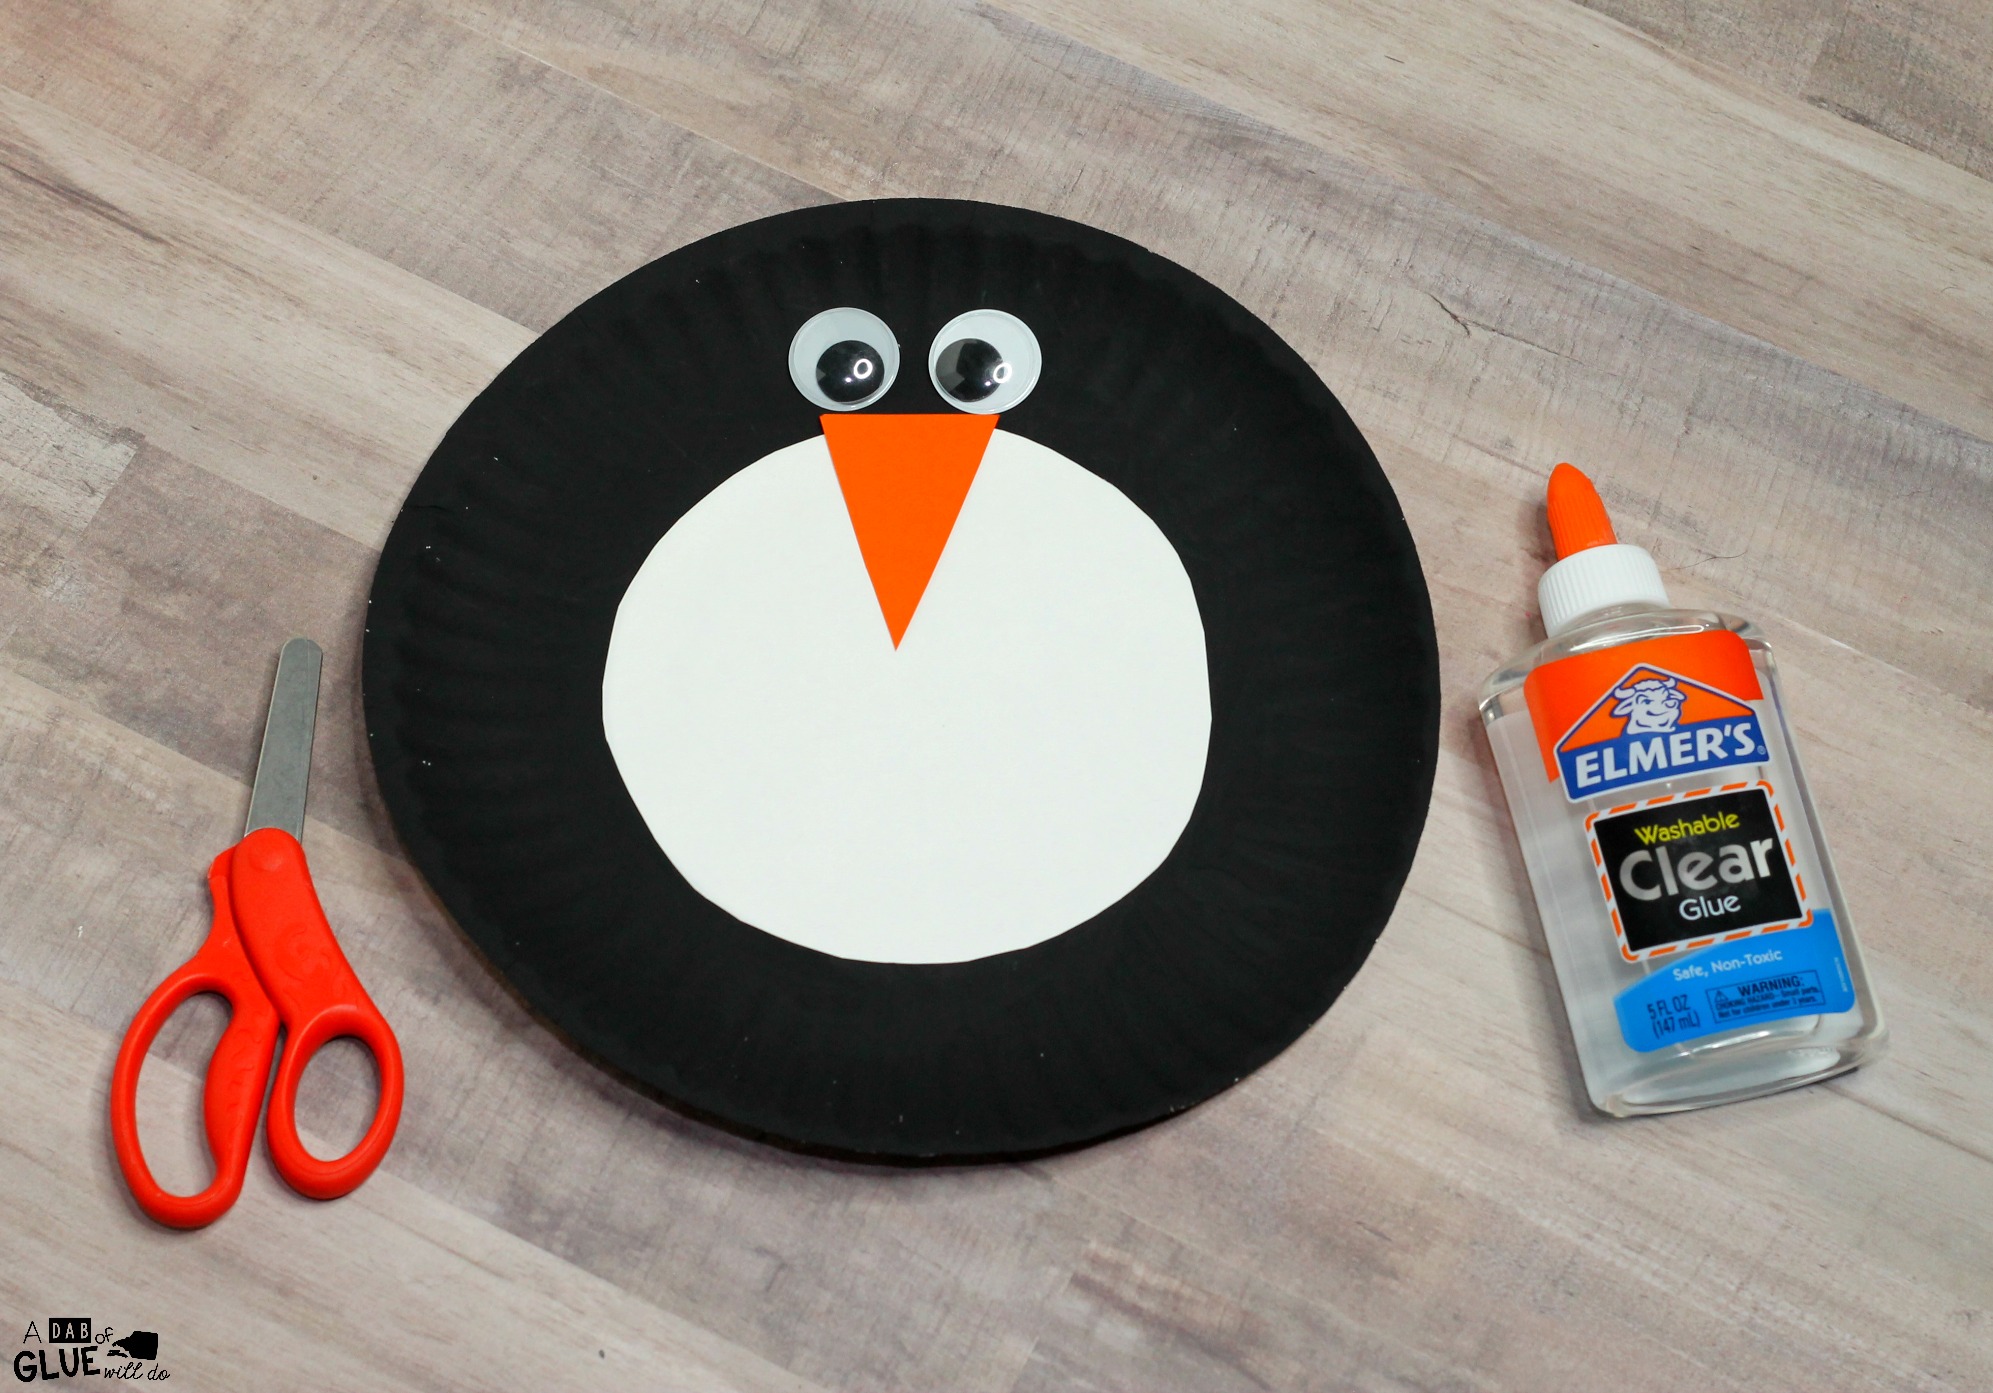 Add this Paper Plate Penguin Craft to your classroom winter crafts! It's perfect for winter habitat unit study or penguin animal study activities too.